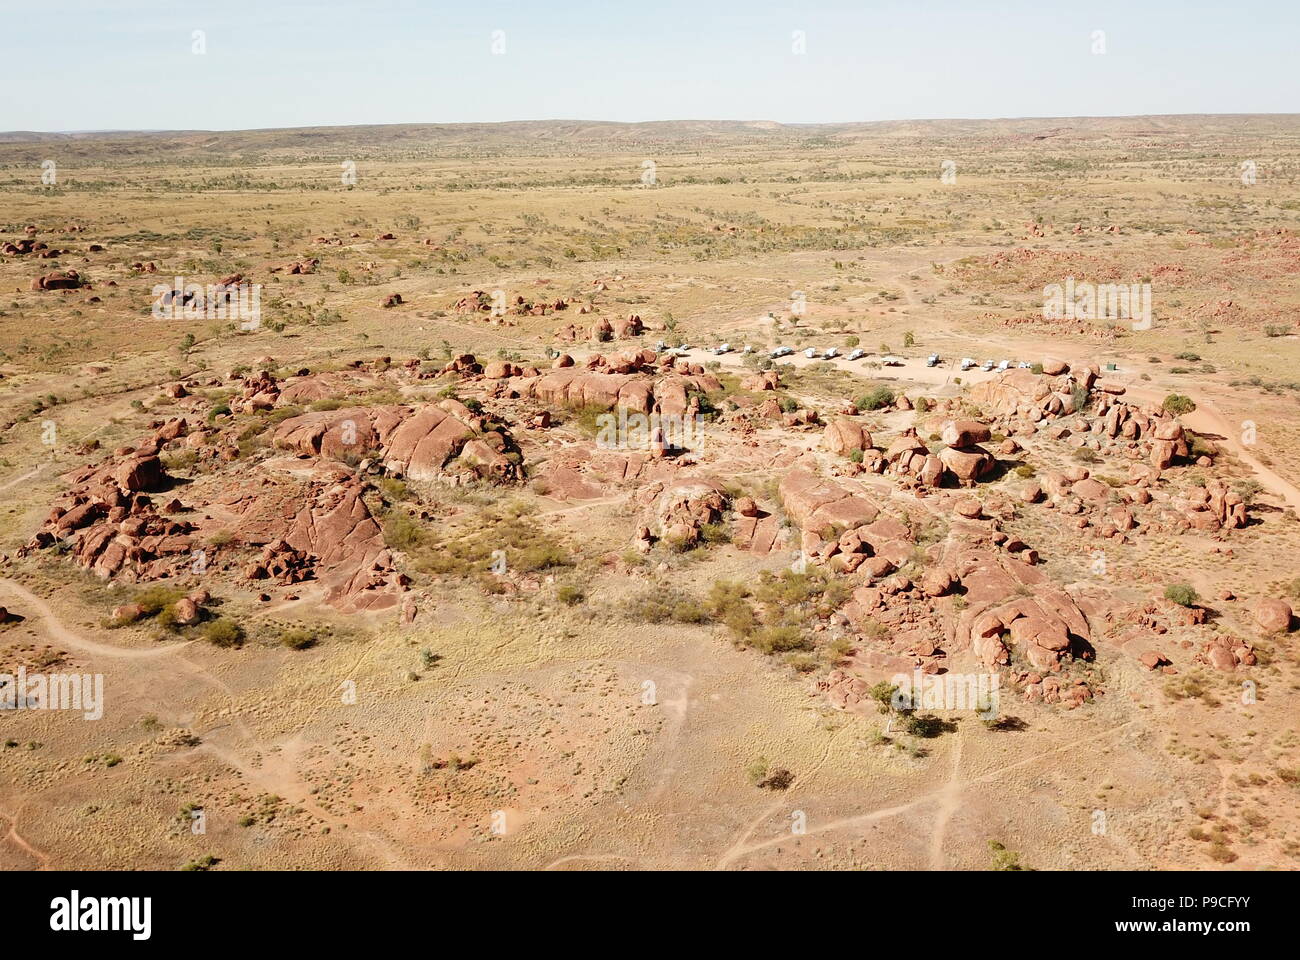 Massive boulders formed by erosion in the Karlu Karlu, Devils Marbles area of the Outback (Northern Territory, Australia) Stock Photo